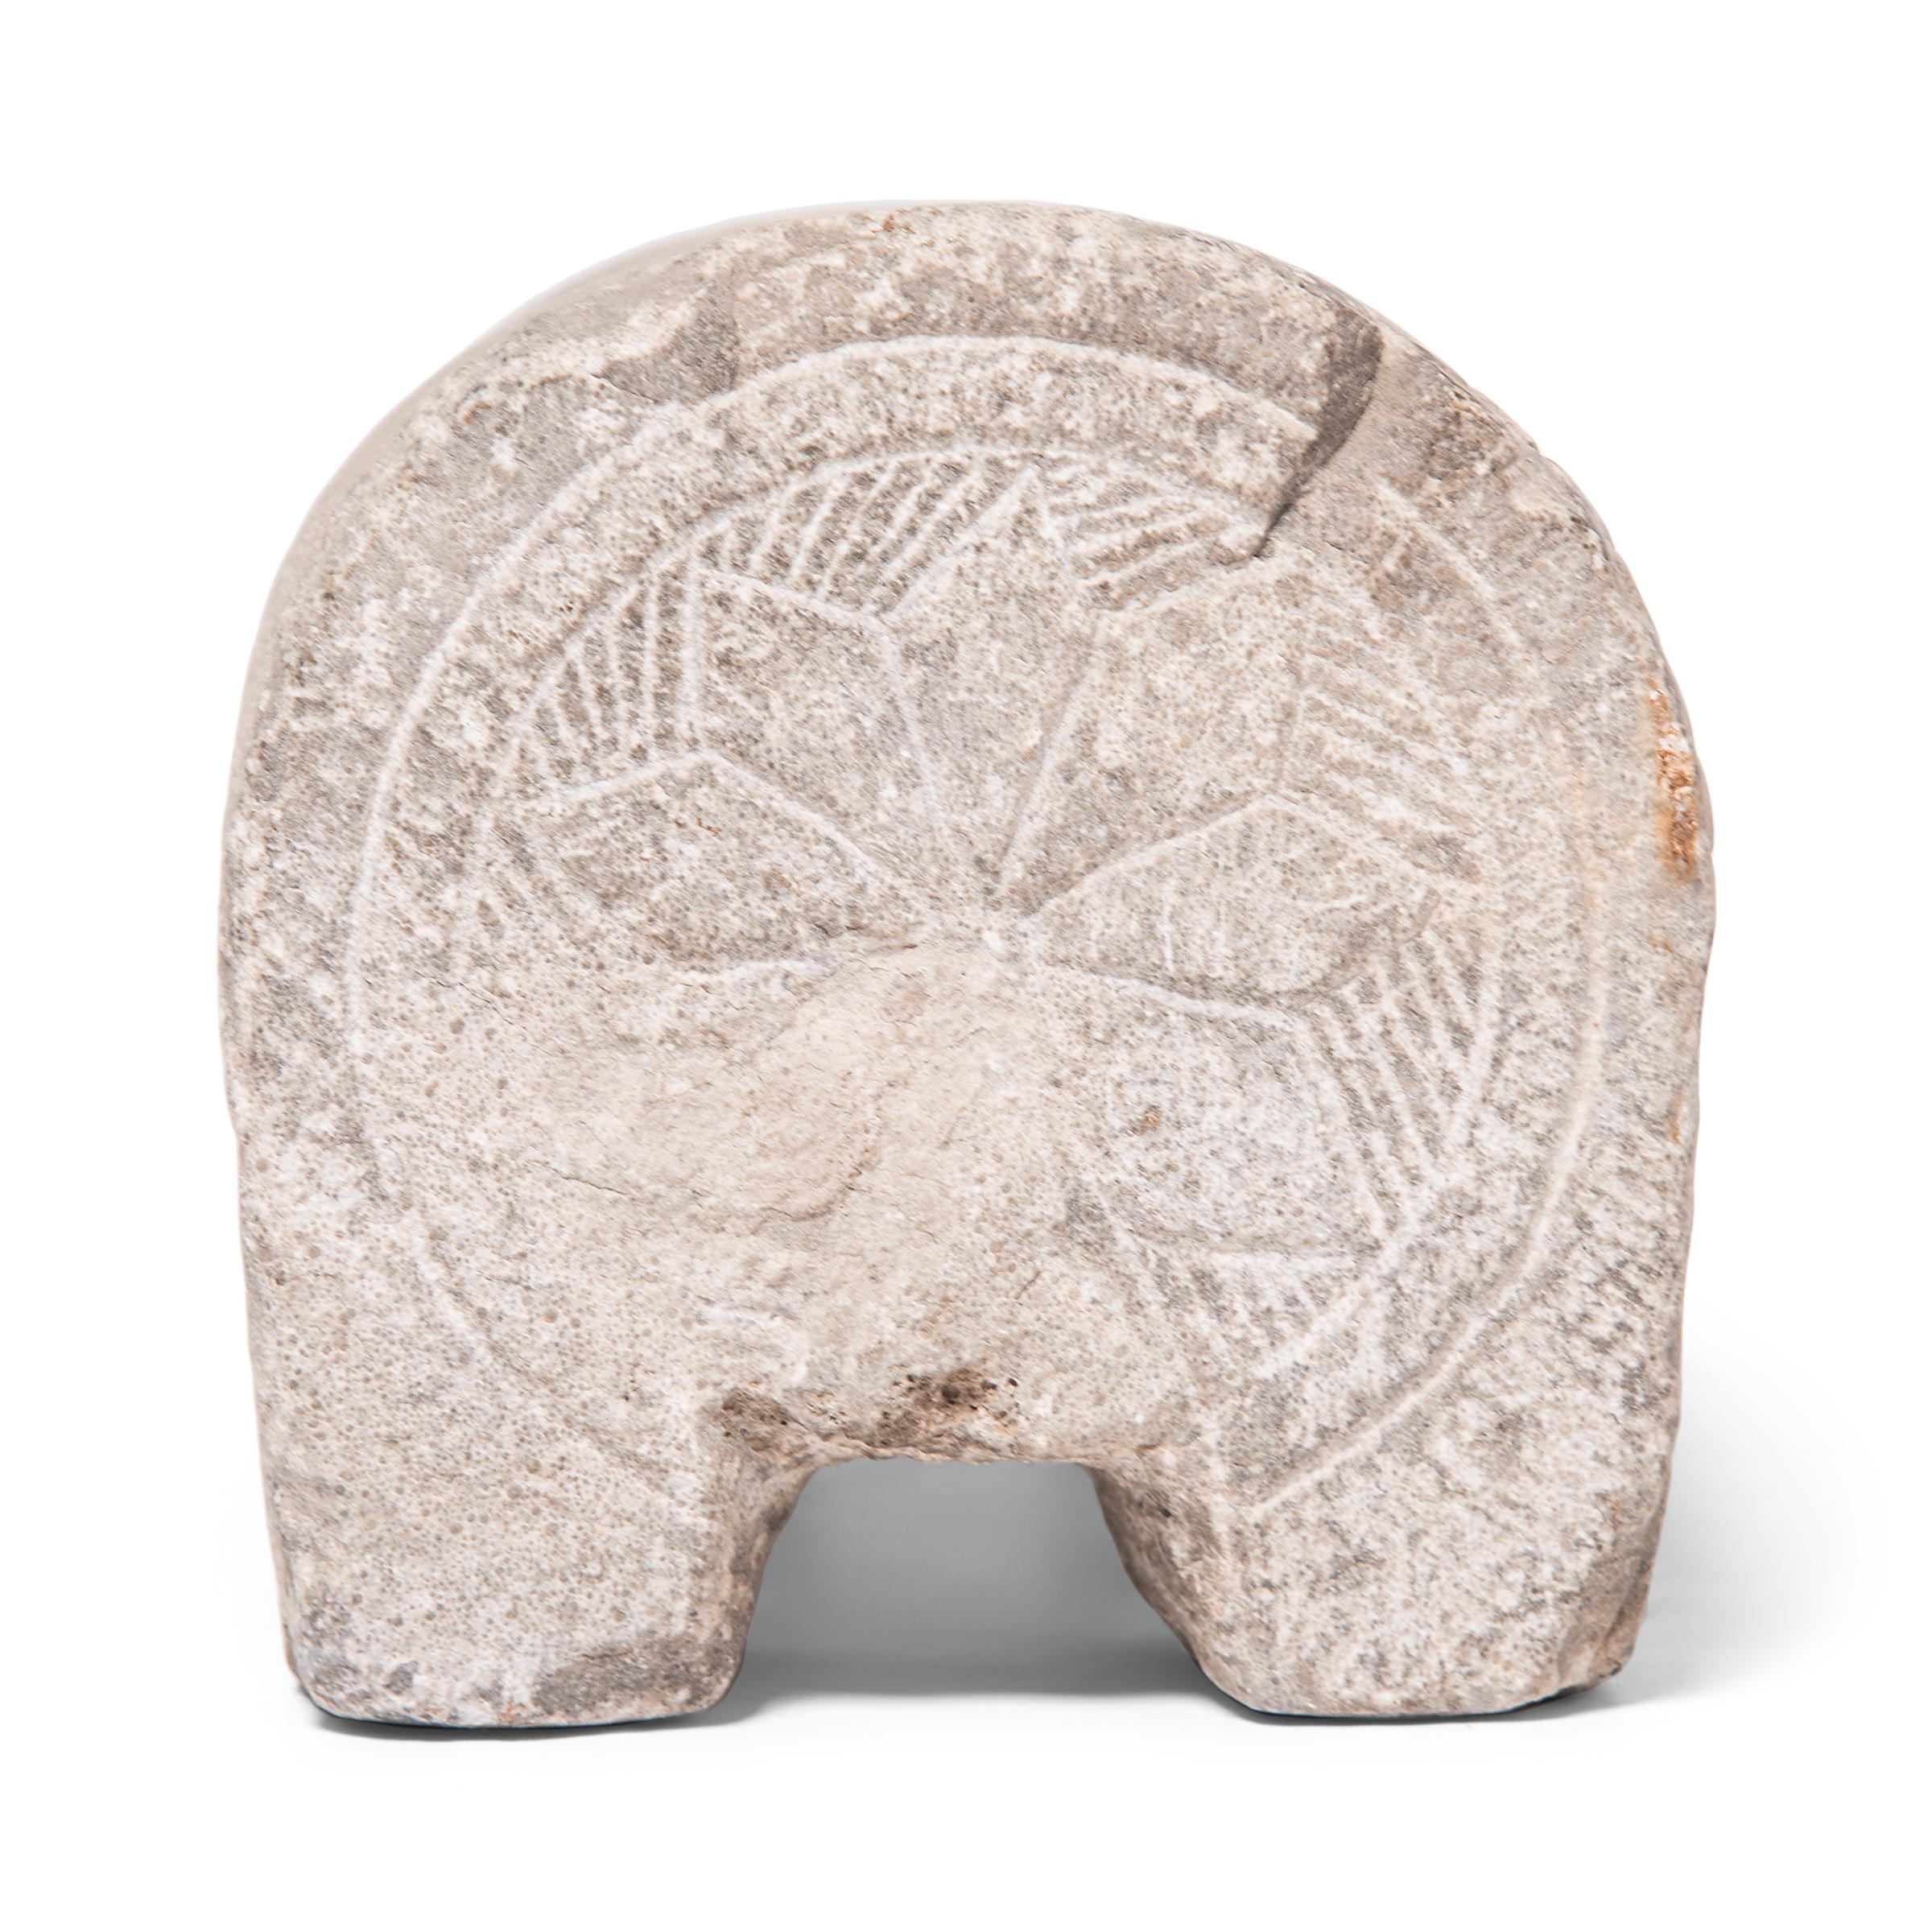 20th Century Chinese Limestone Foot Rest, c. 1900 For Sale